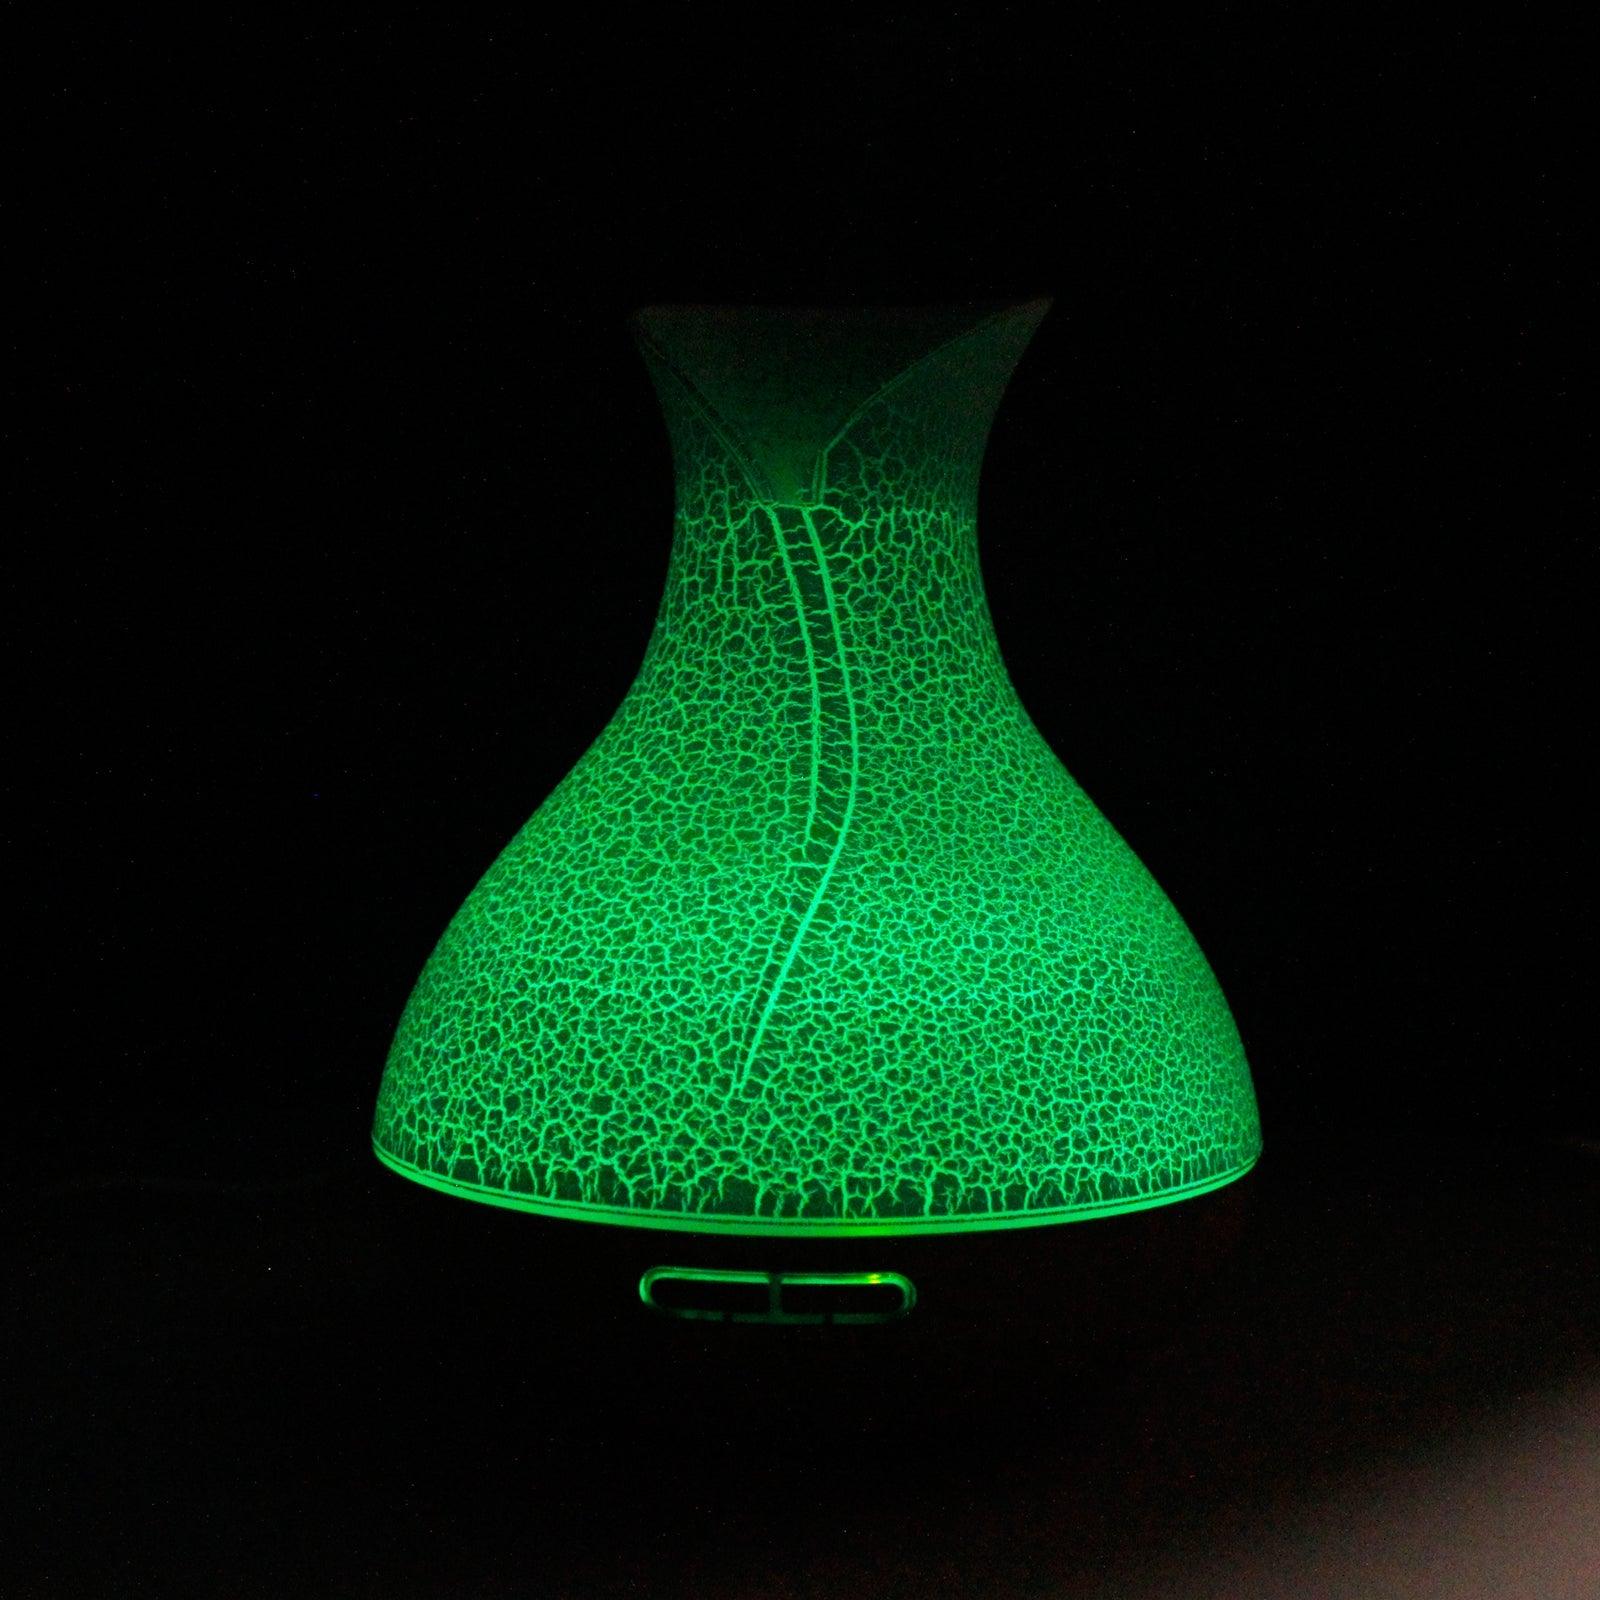 Palma Aroma Diffuser / Atomiser - Shell Effect - USB - Colour Change - Timer - Charming Spaces